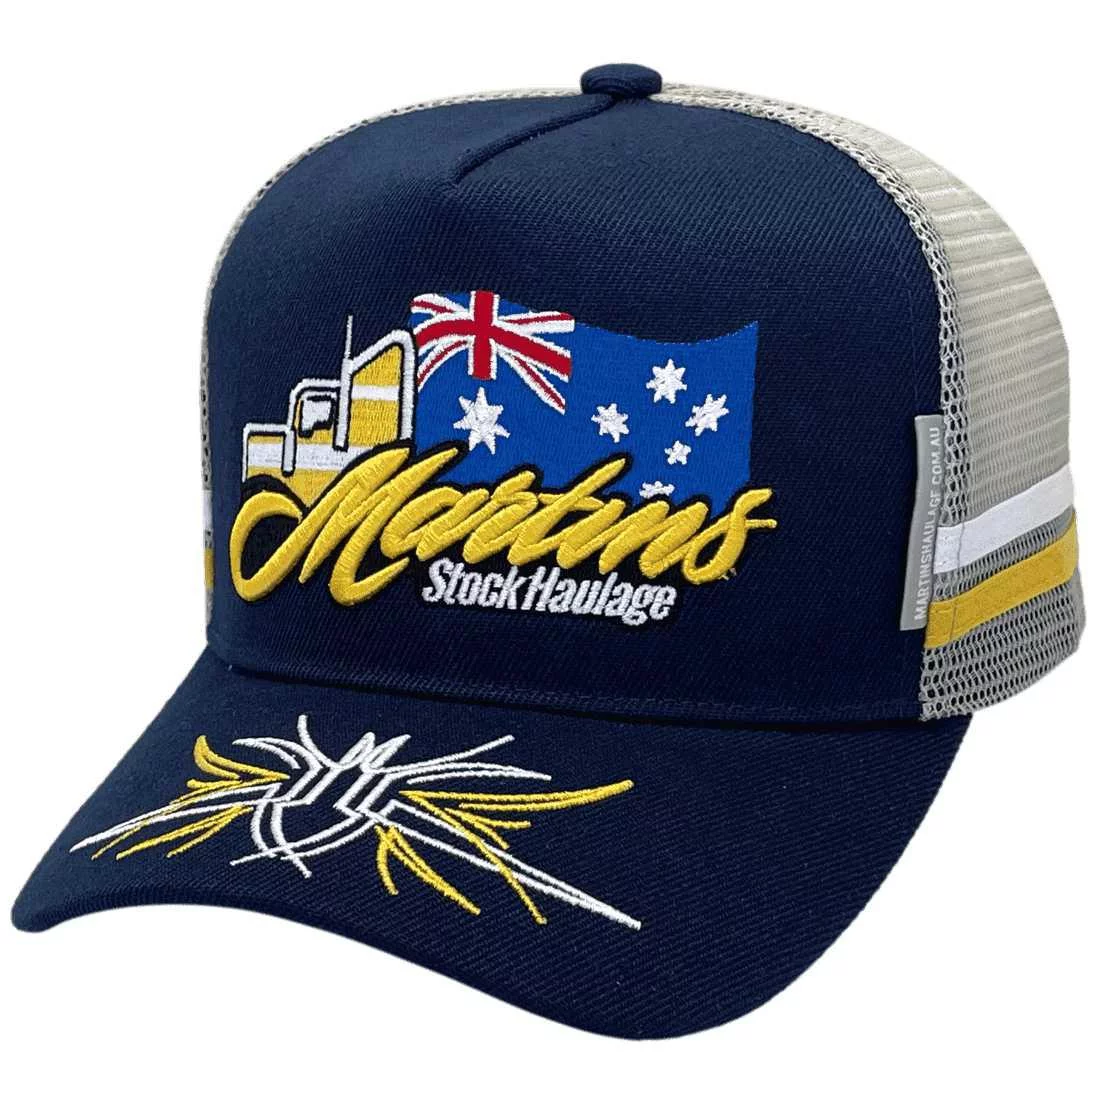 Martins Stock Haulage Scone NSW HP Original Power Aussie Trucker Hat with Double Side Bands and Australian Head Fit Crown with pinstripe embroidery brim